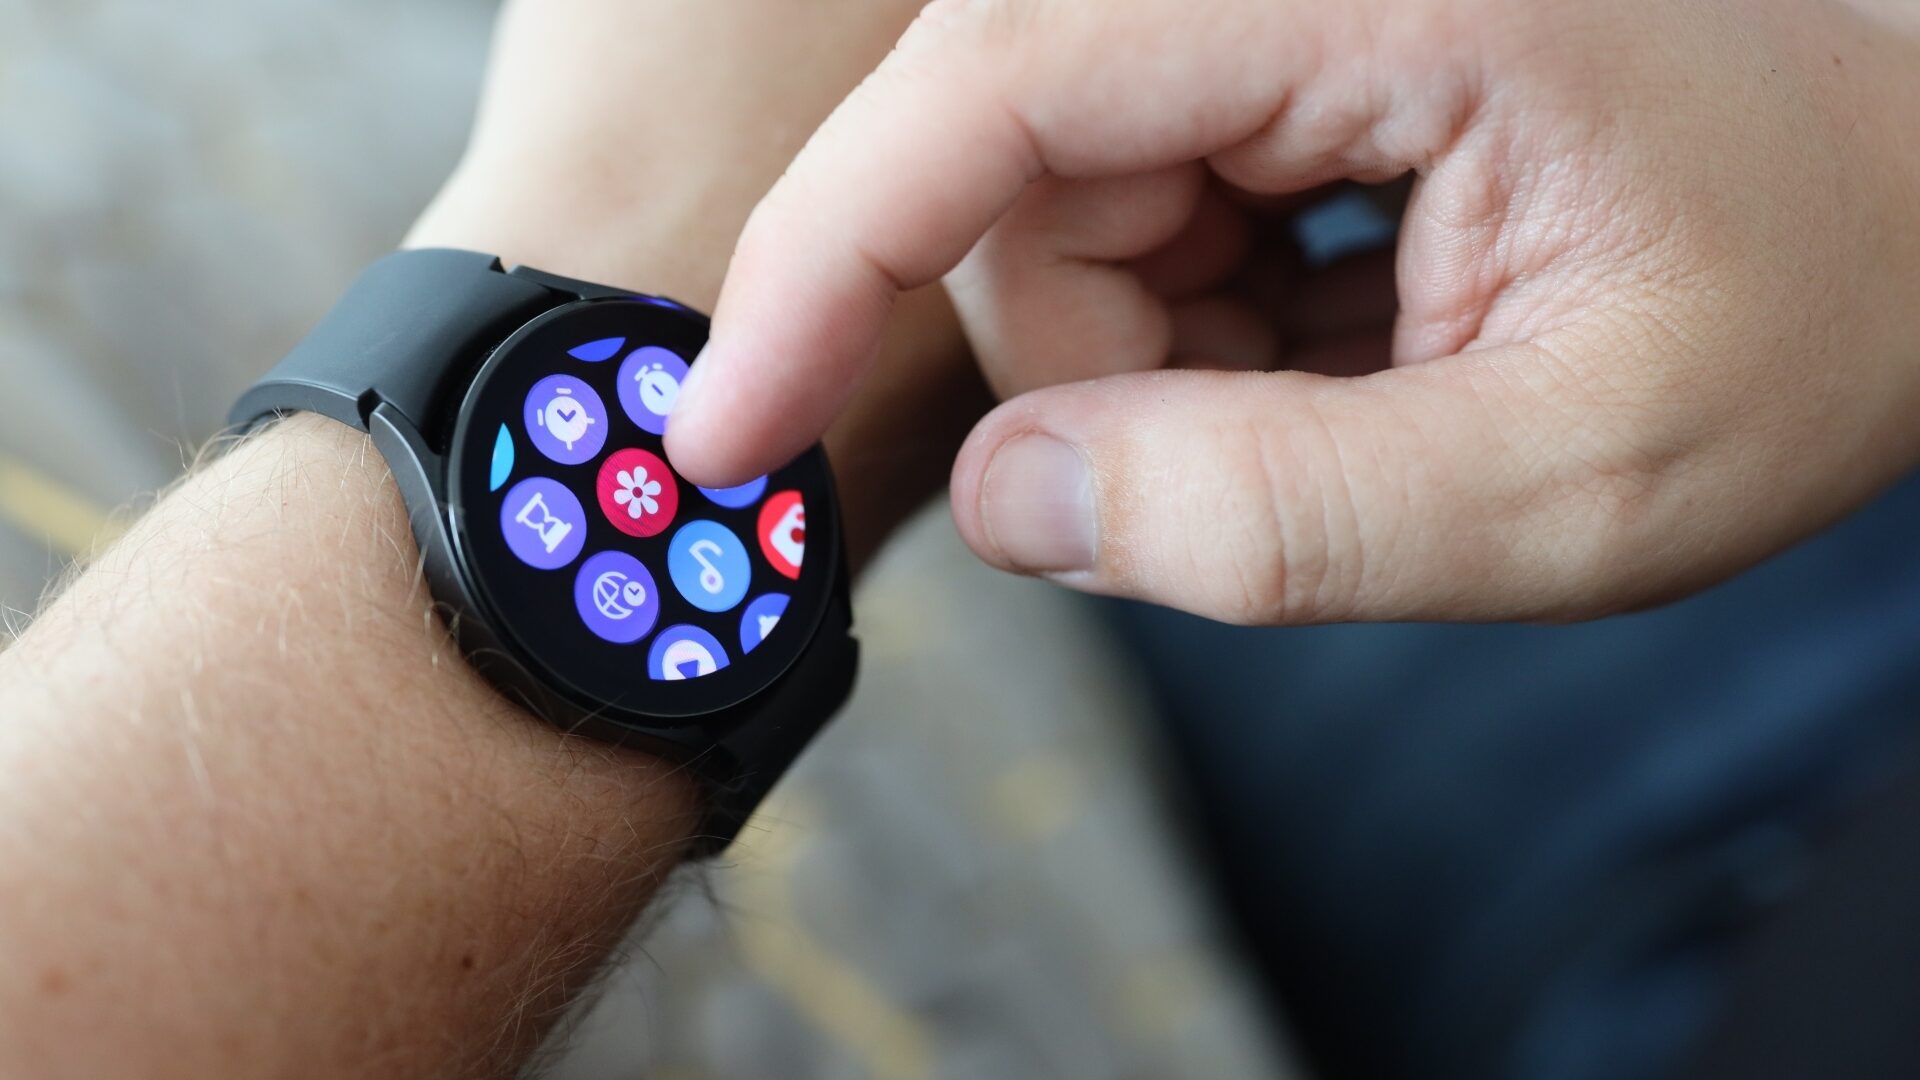 Samsung Galaxy Watch Active 2 review: Our updated 2021 test - Wareable